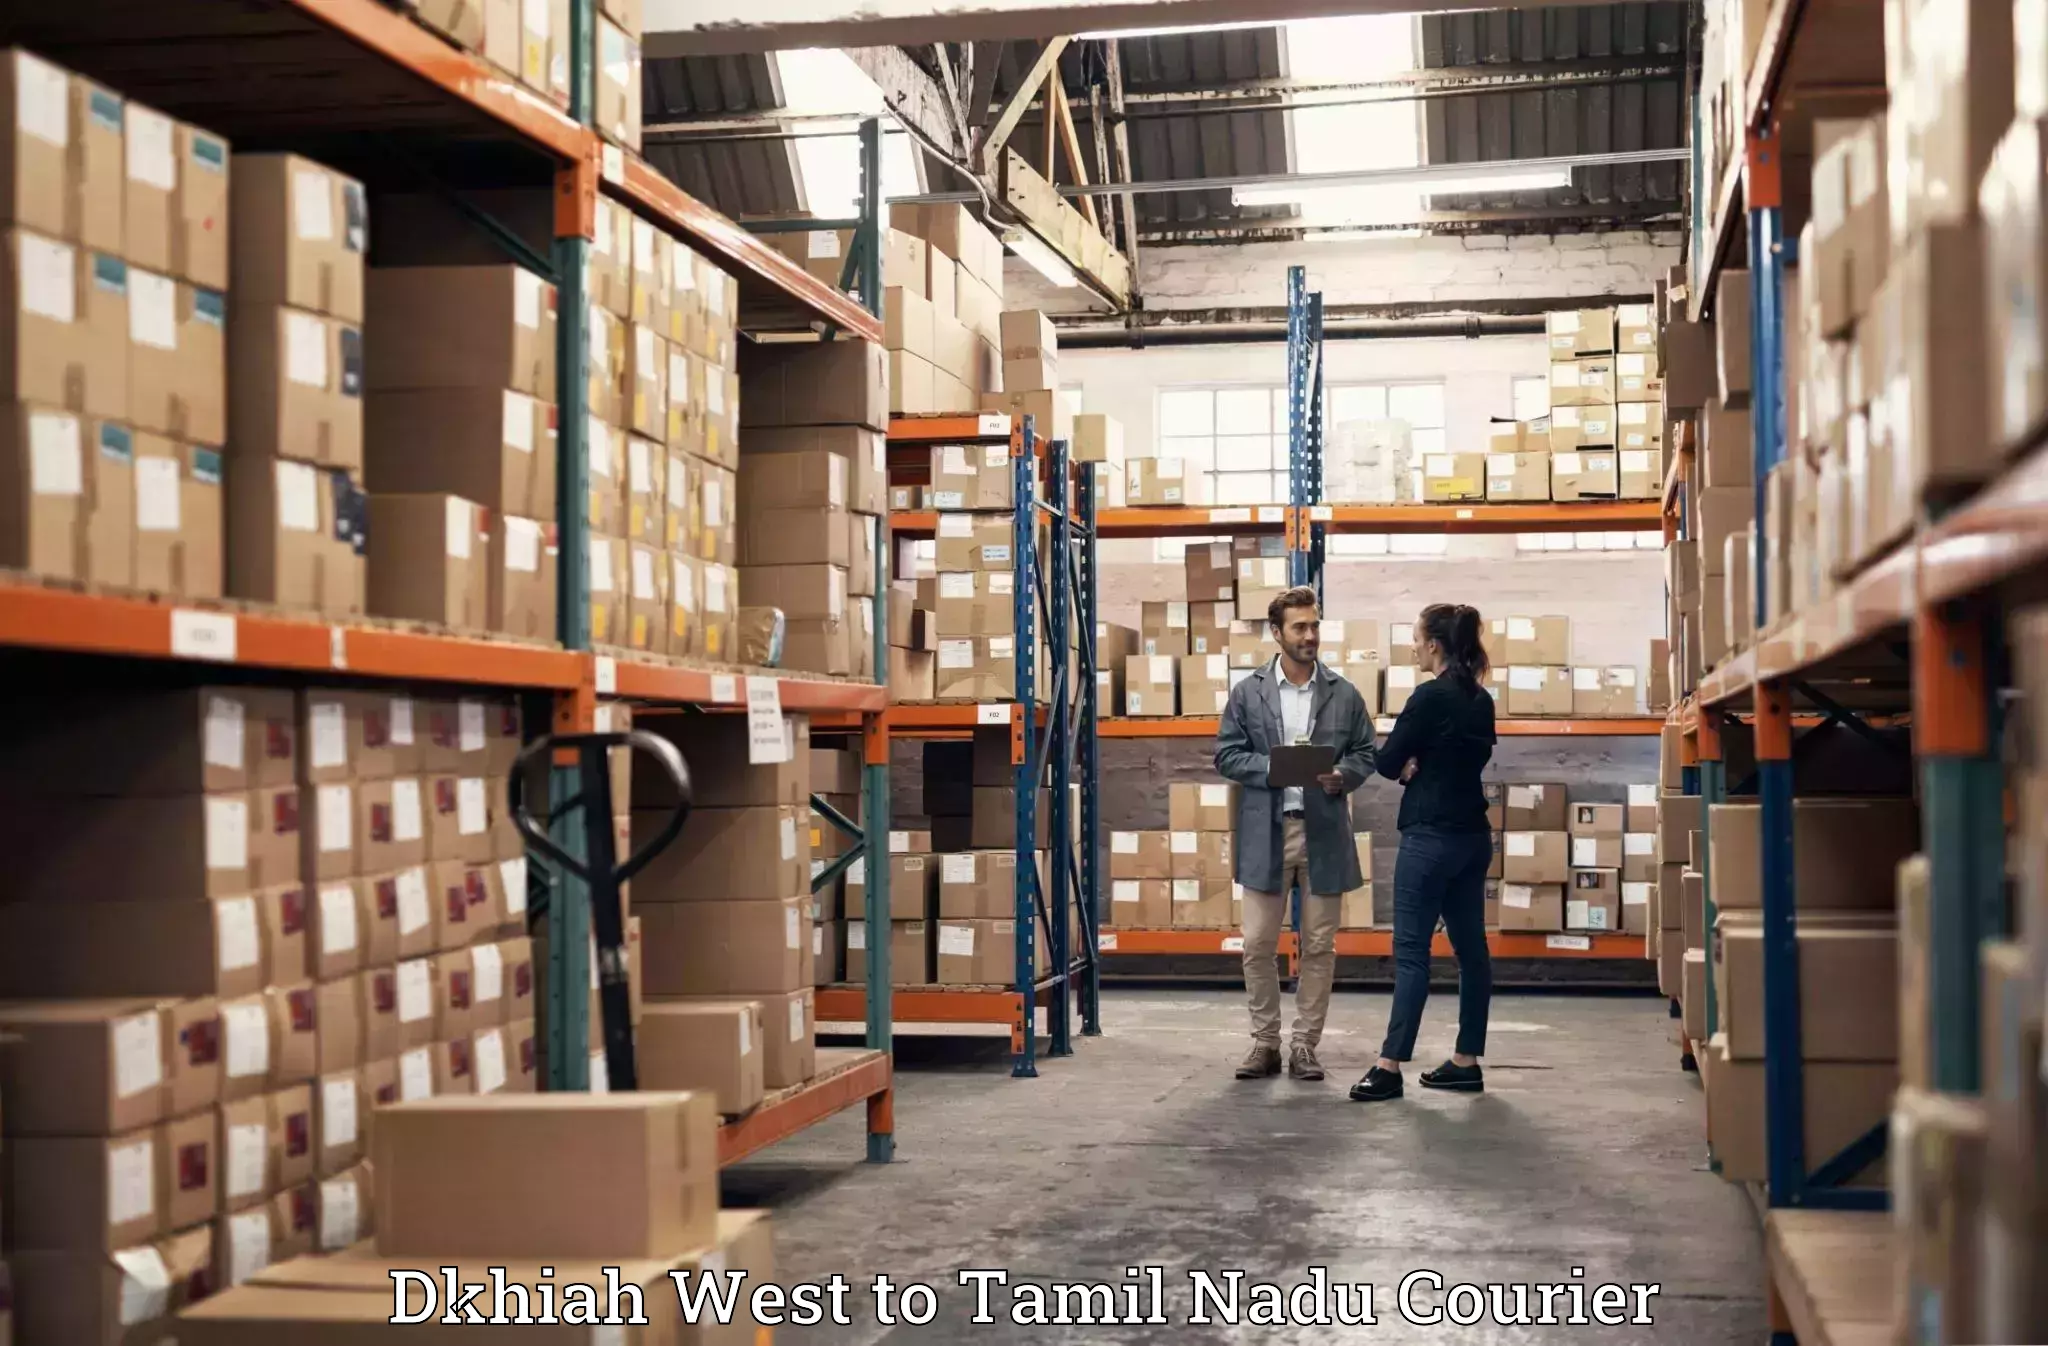 Personal effects shipping in Dkhiah West to Orathanadu